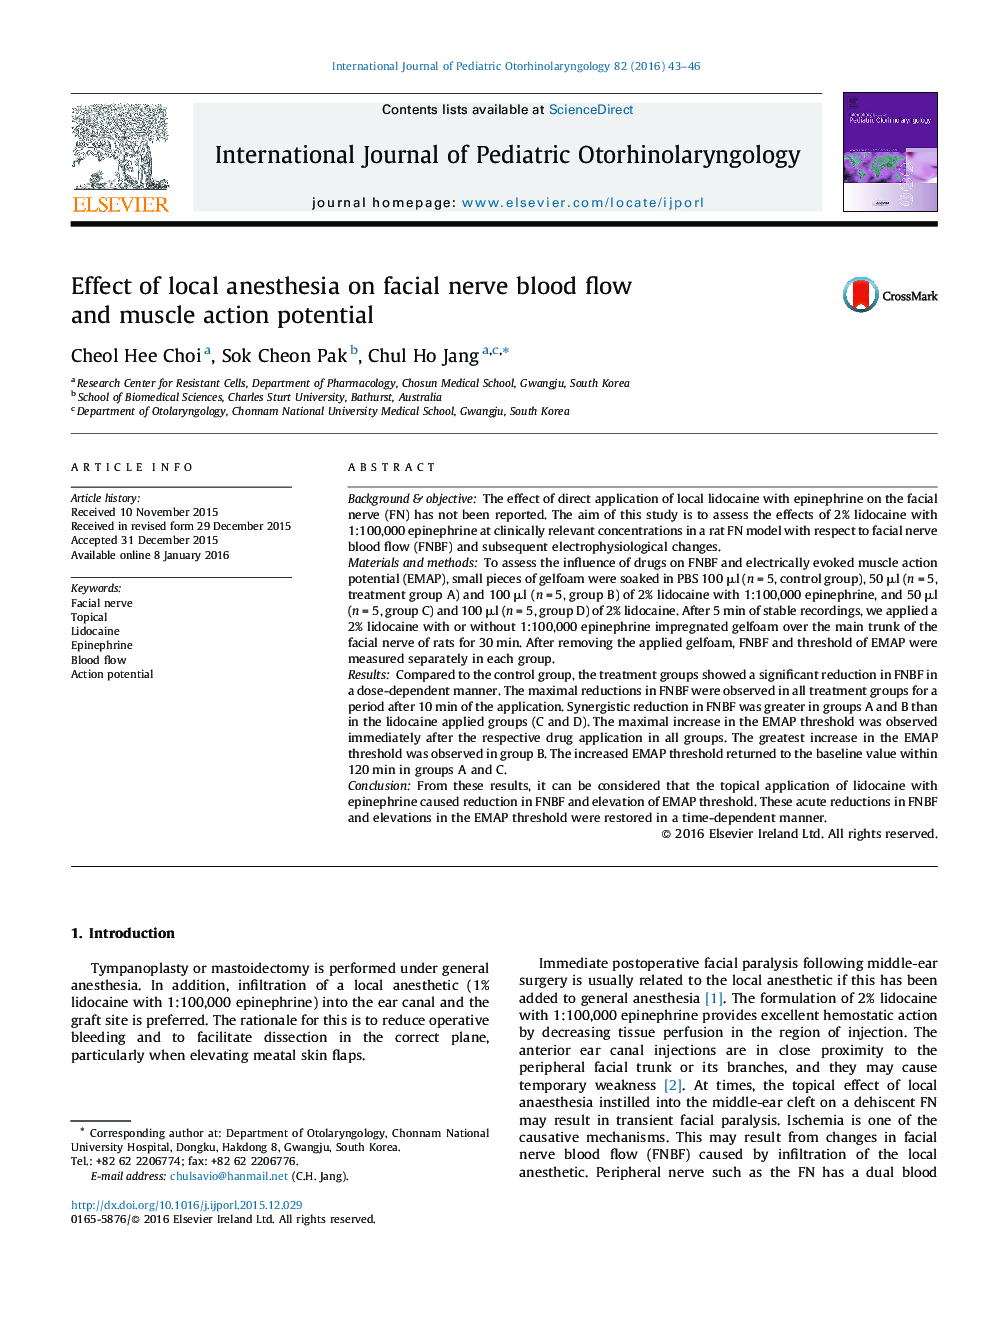 Effect of local anesthesia on facial nerve blood flow and muscle action potential